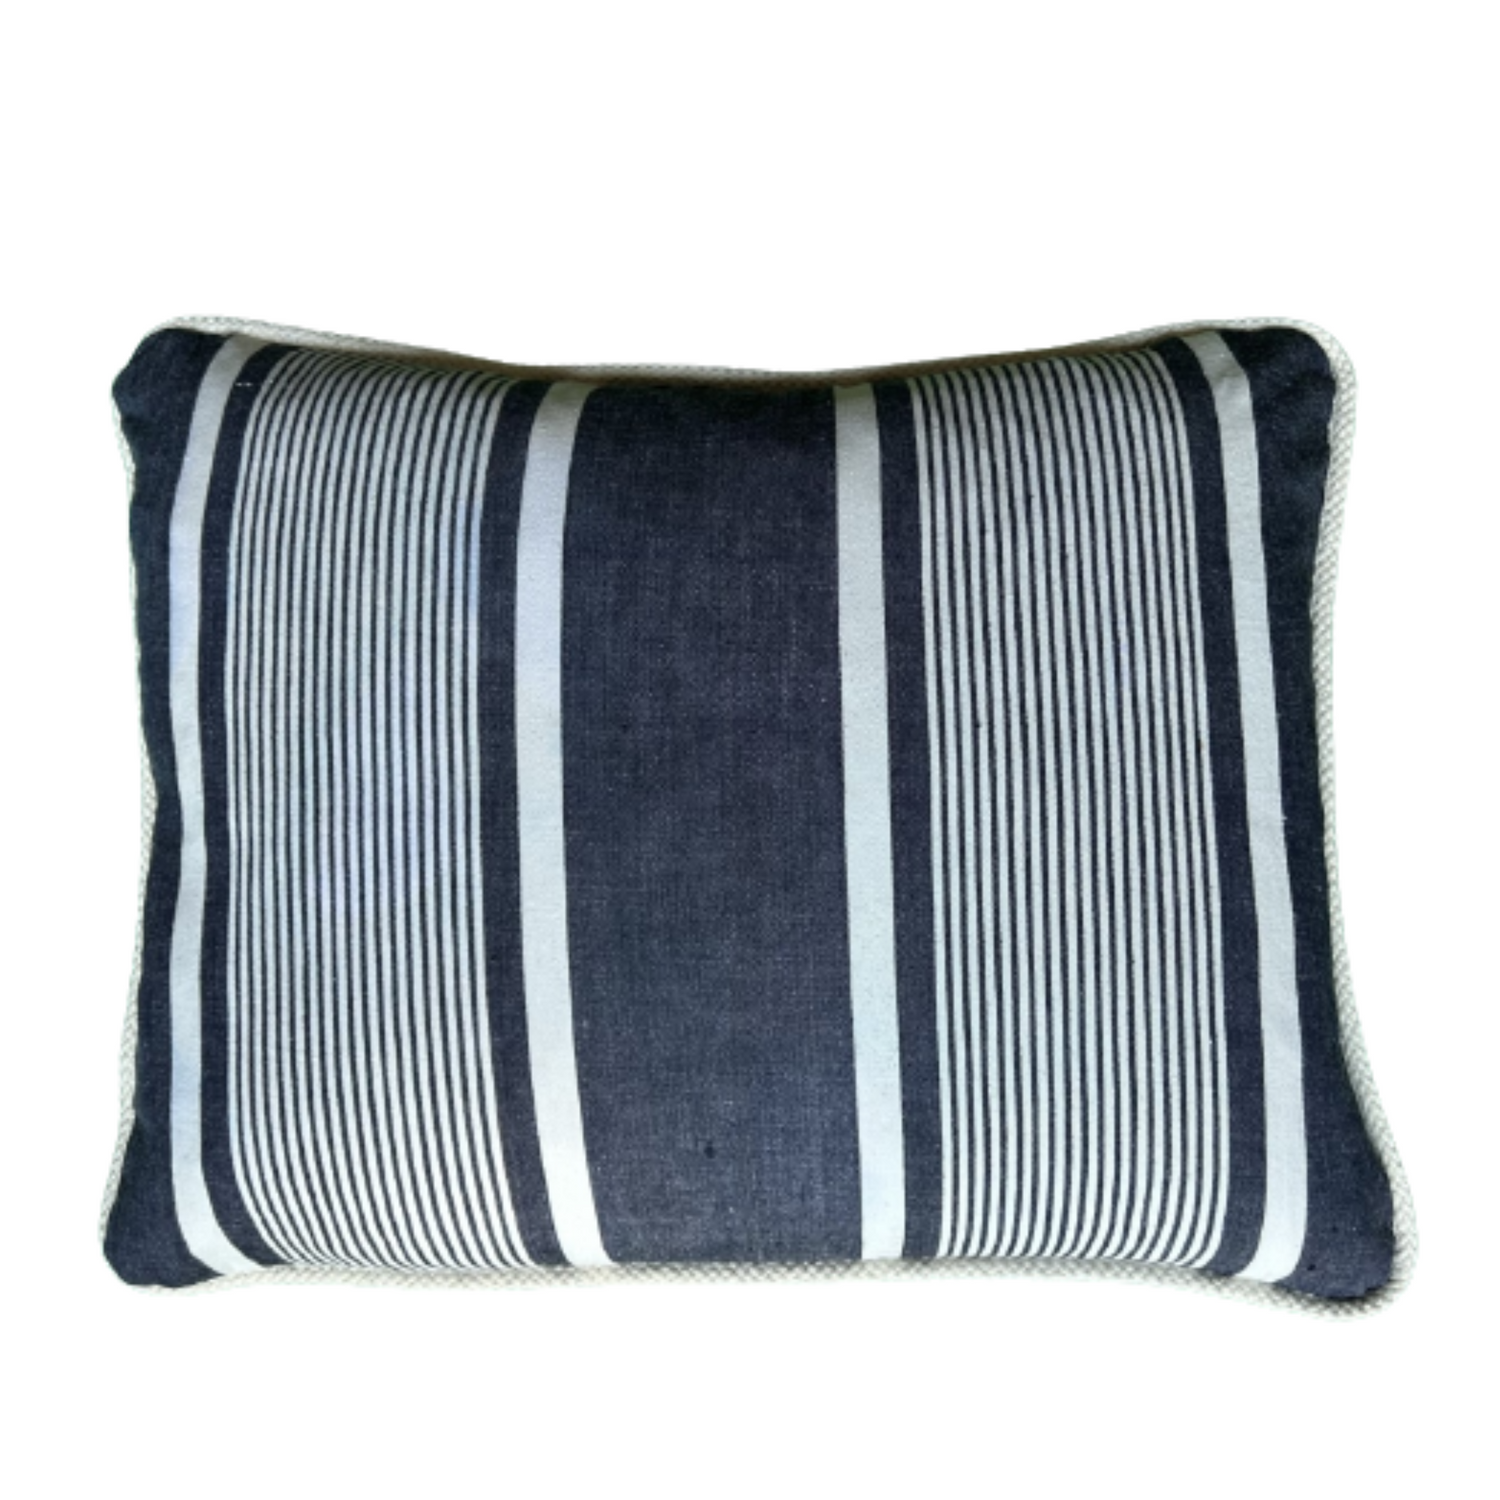 Antique Charcoal Blue Ticking Stripe 14x18 Decorative Pillow with Down Feather Insert